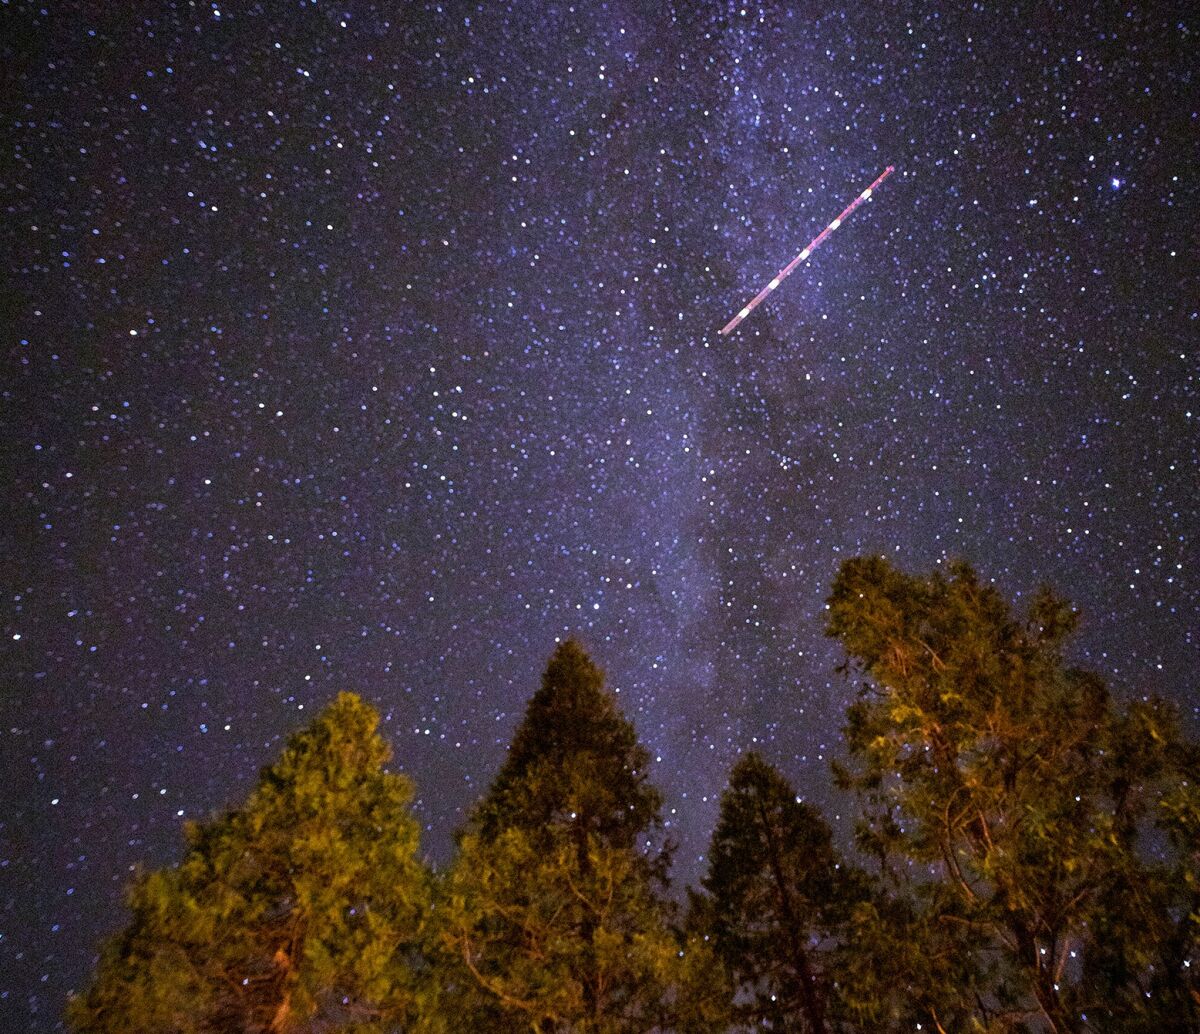 Astrophotography at Yosemite National Park